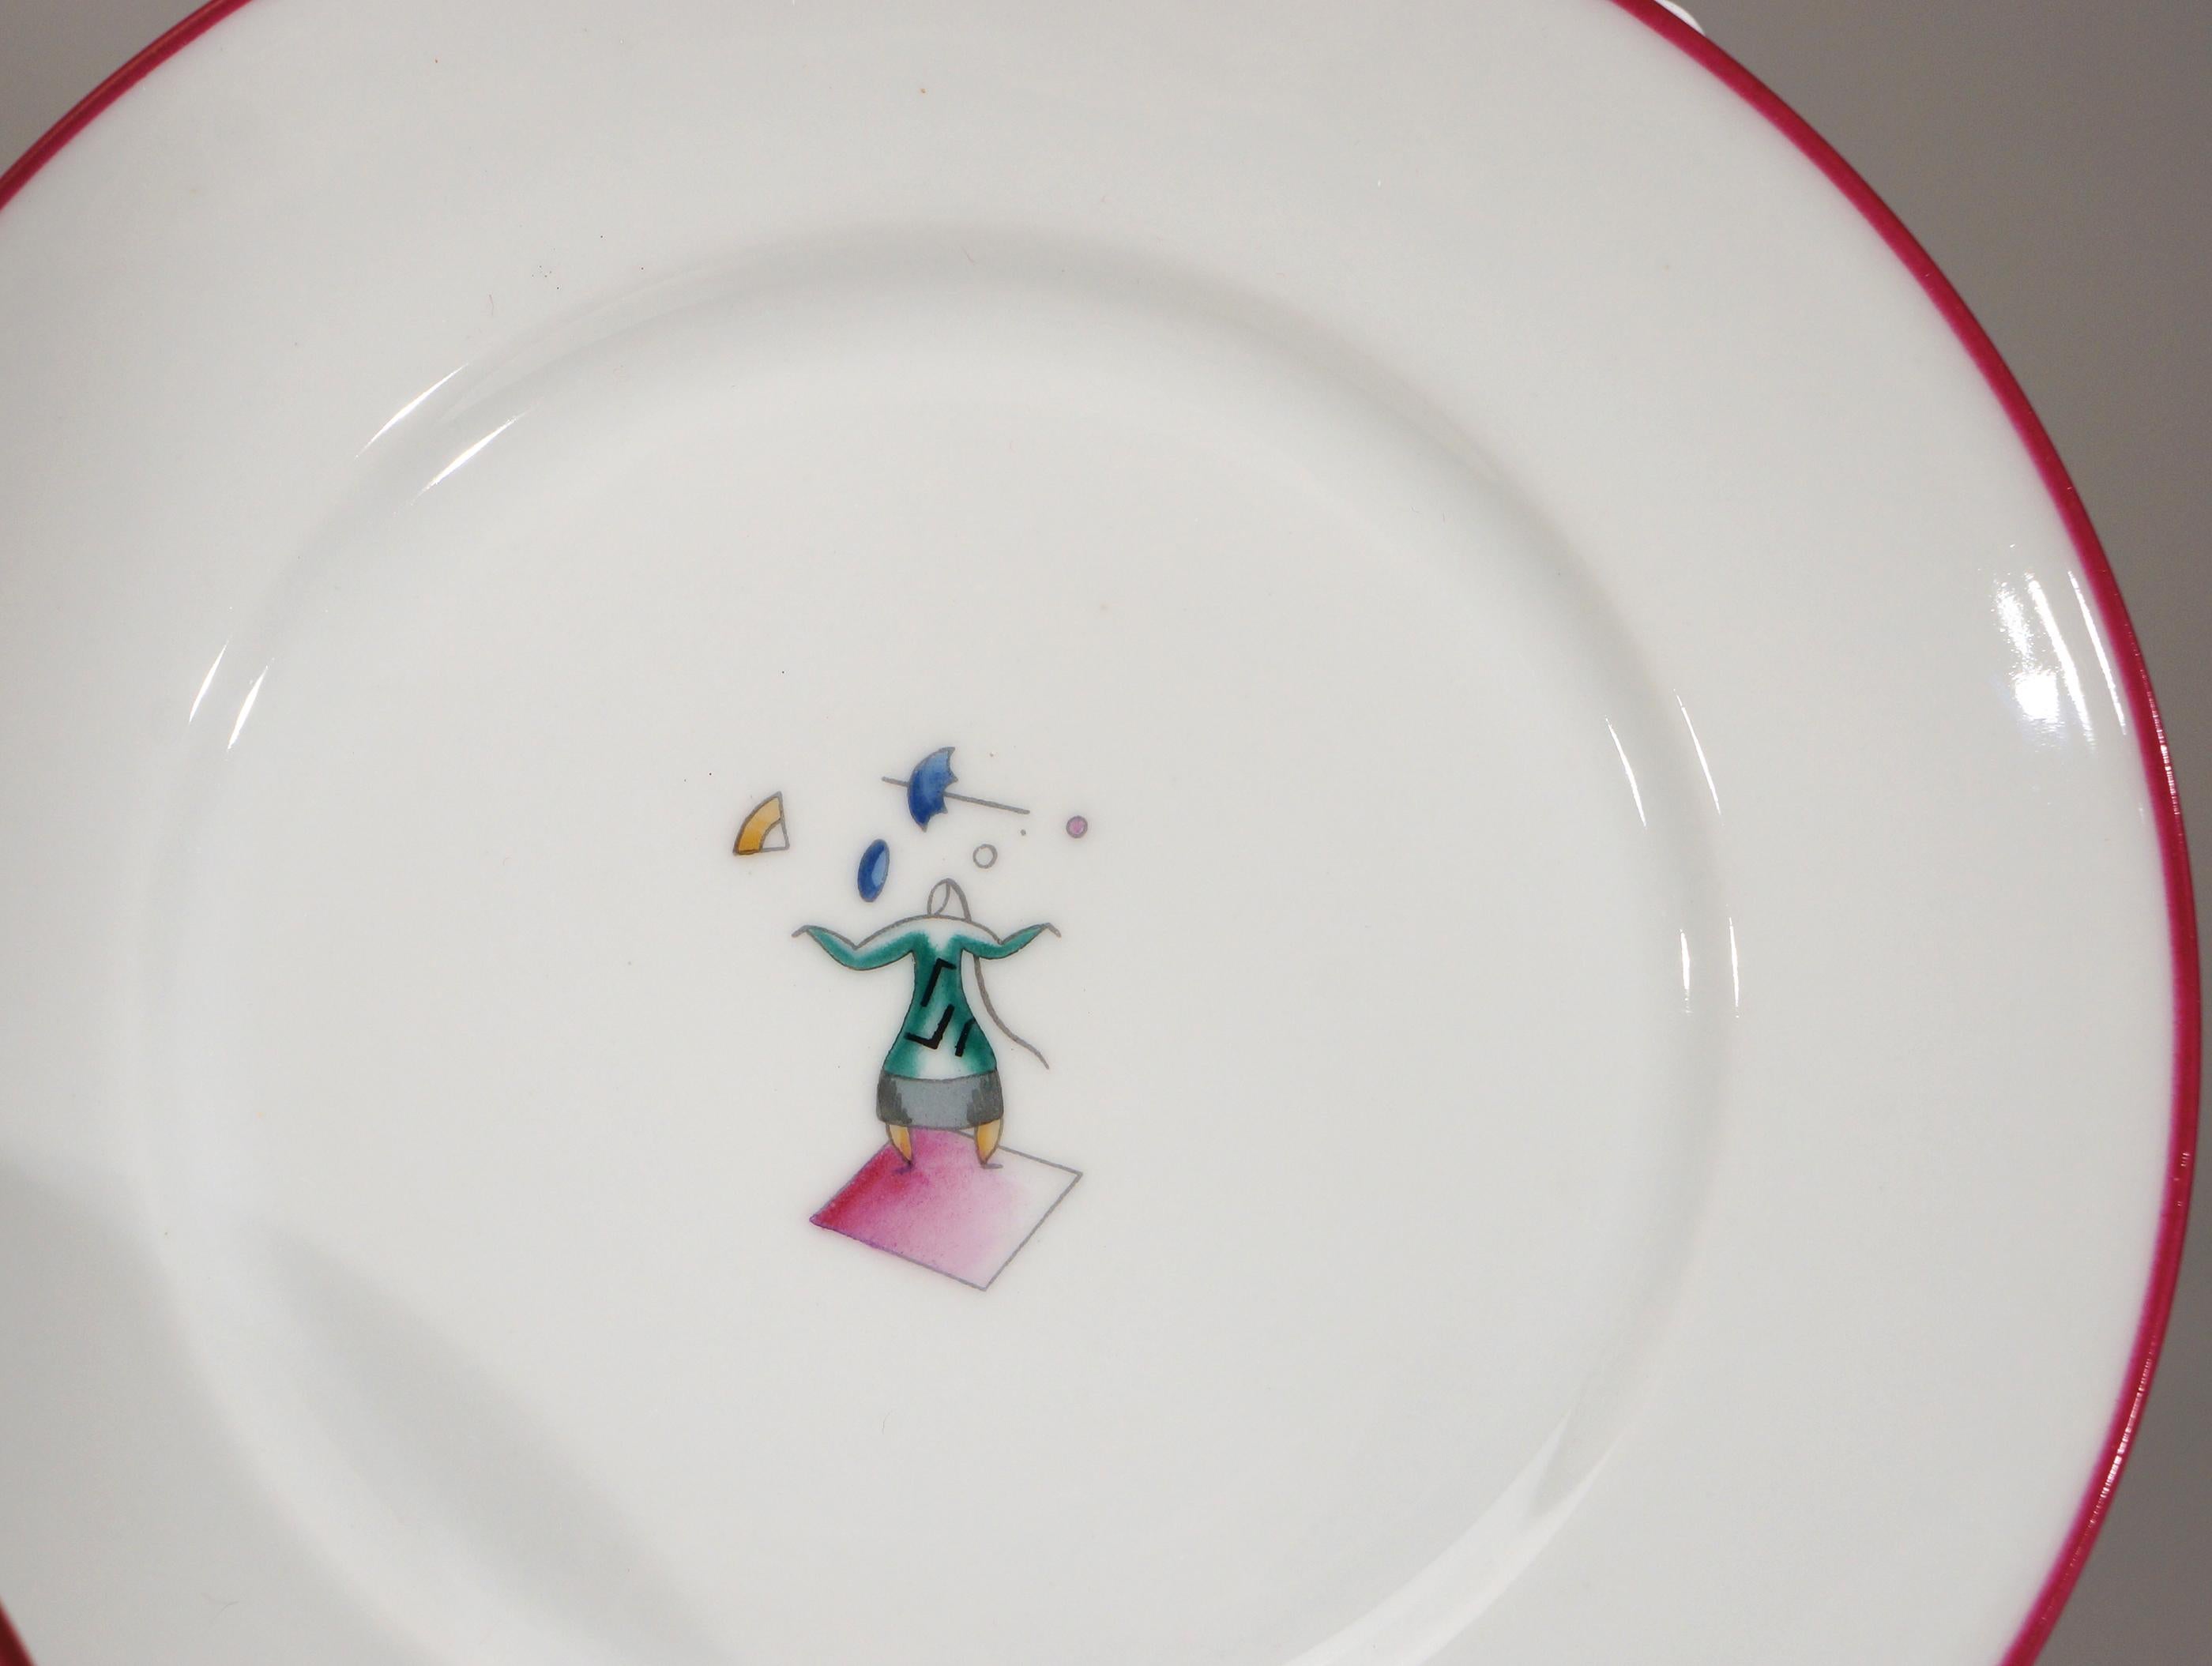 This set of 8 Richard Ginori dessert plates are decorated with subjects from the Gio Ponti designs of his 